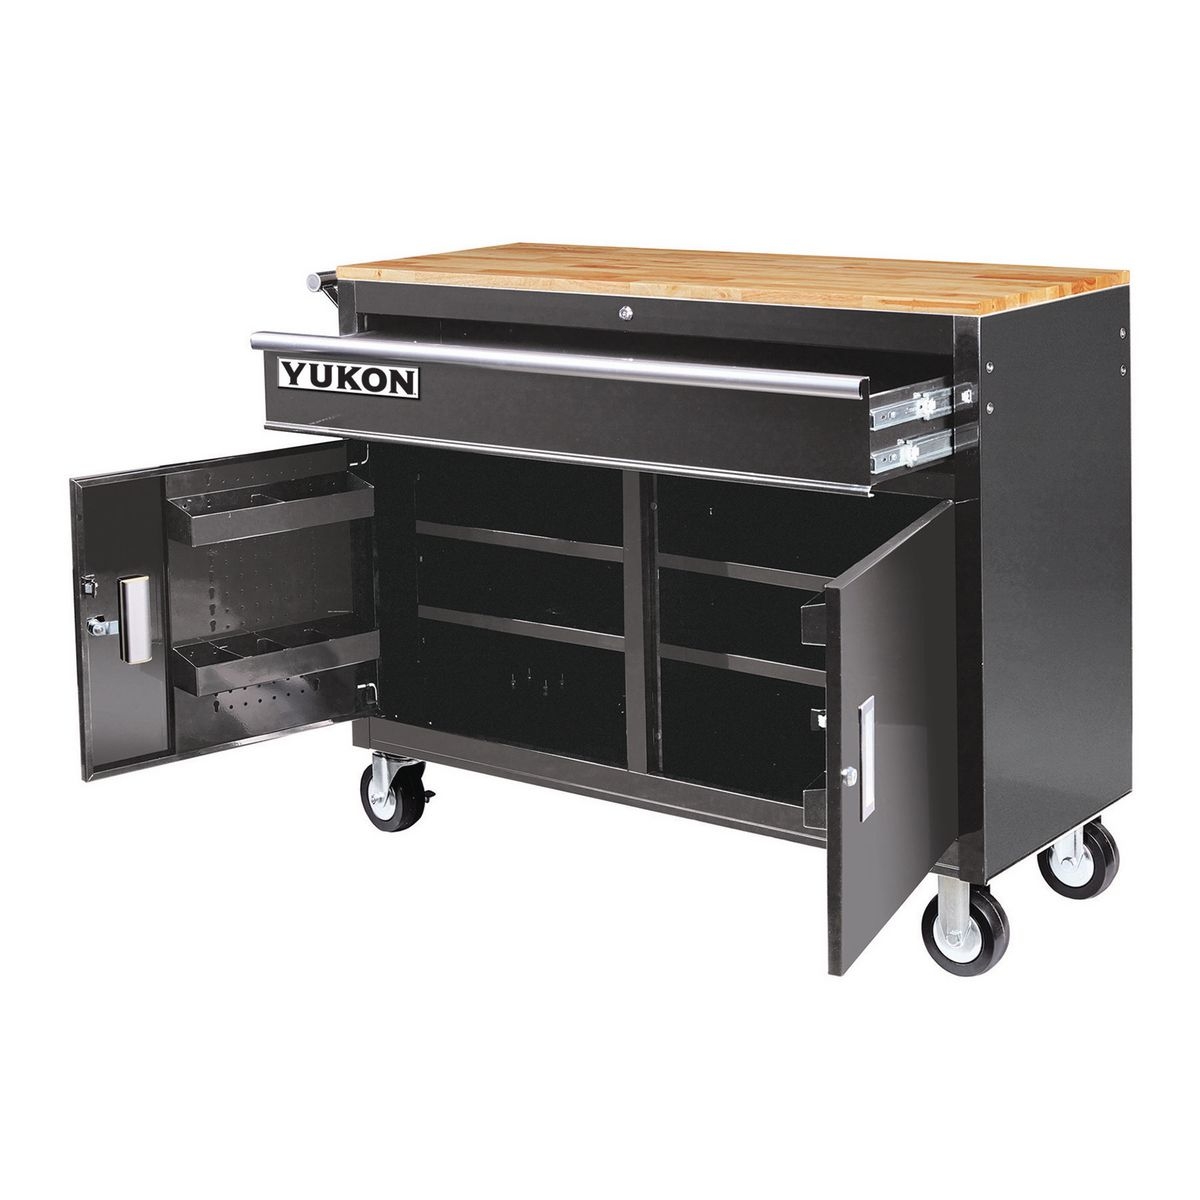 YUKON 46 in. Mobile Storage Cabinet with Wood Top - Item 64012 / 64023